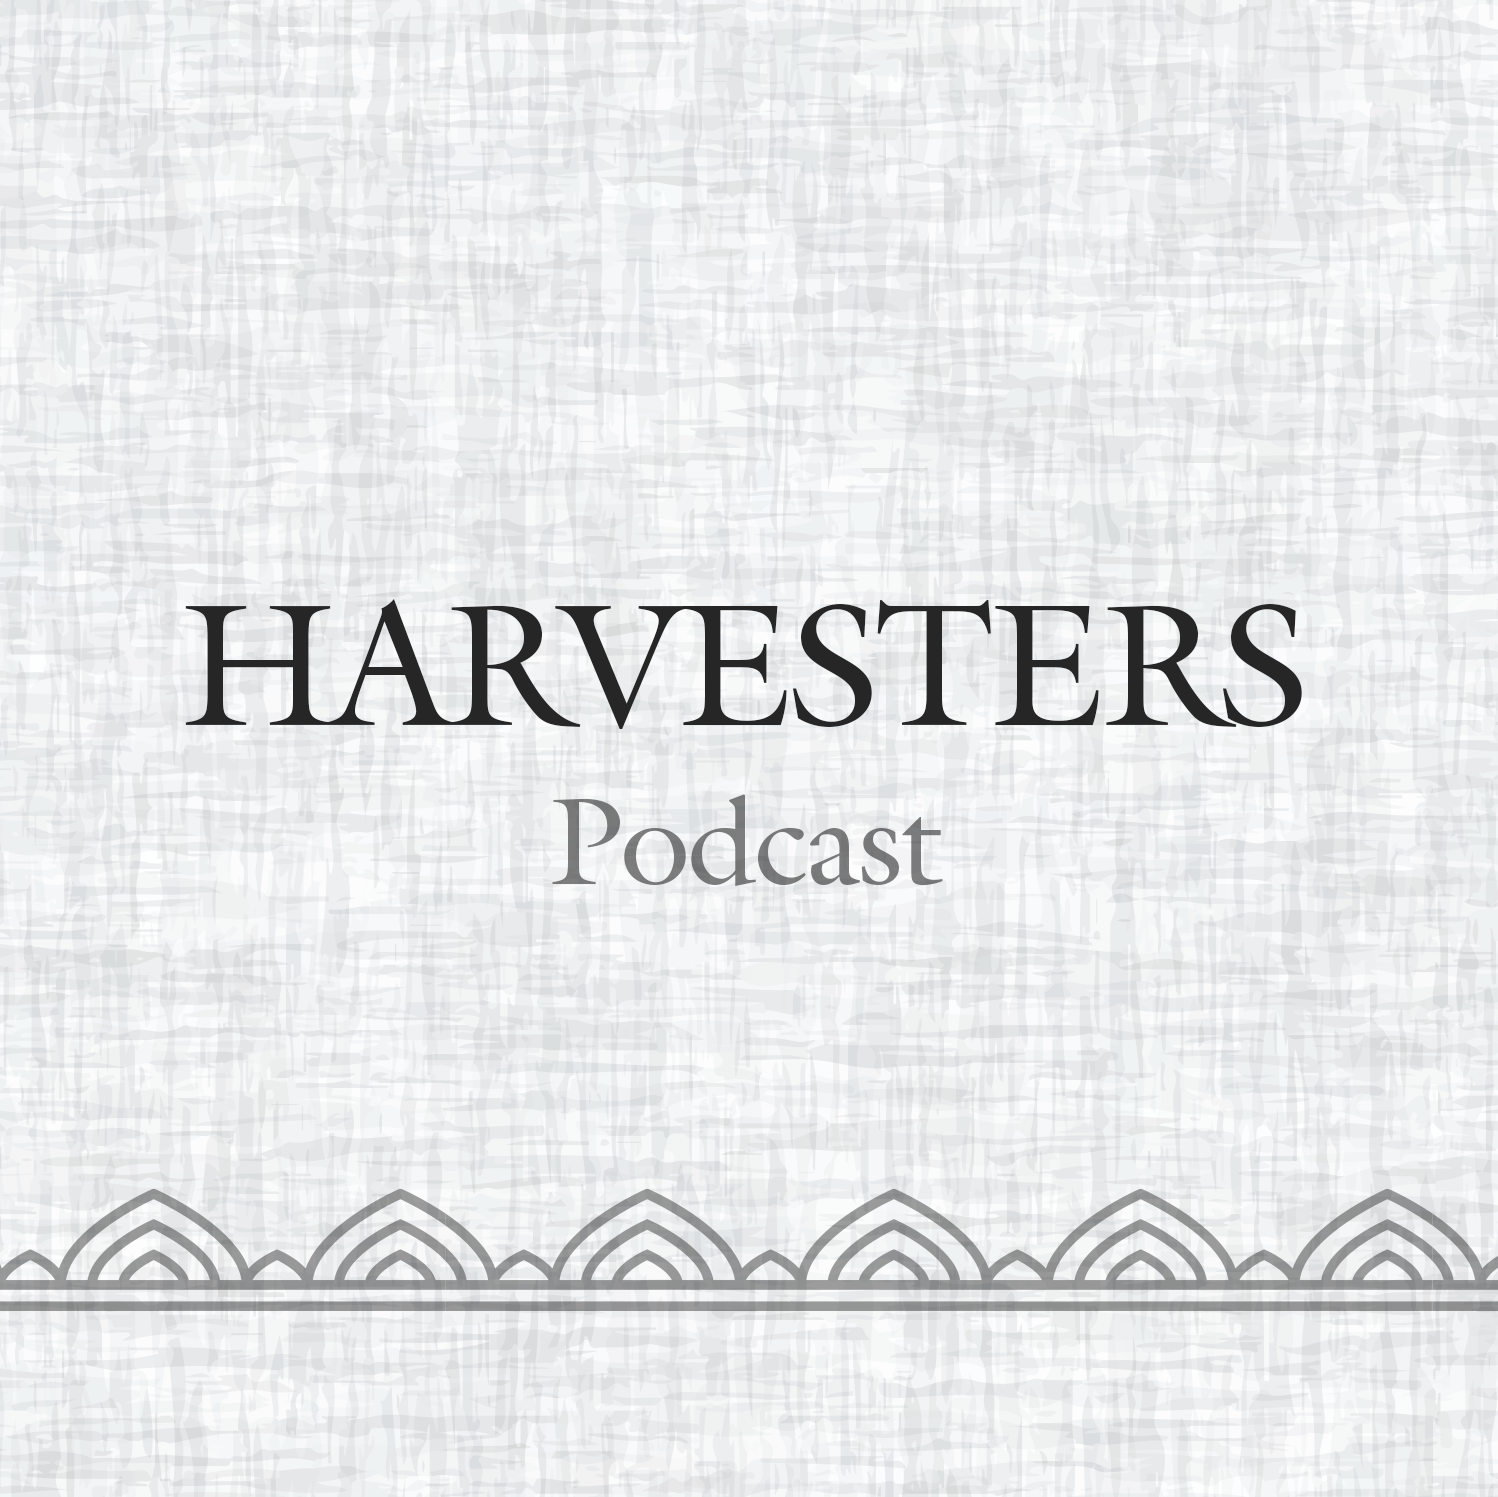 Harvesters Podcast